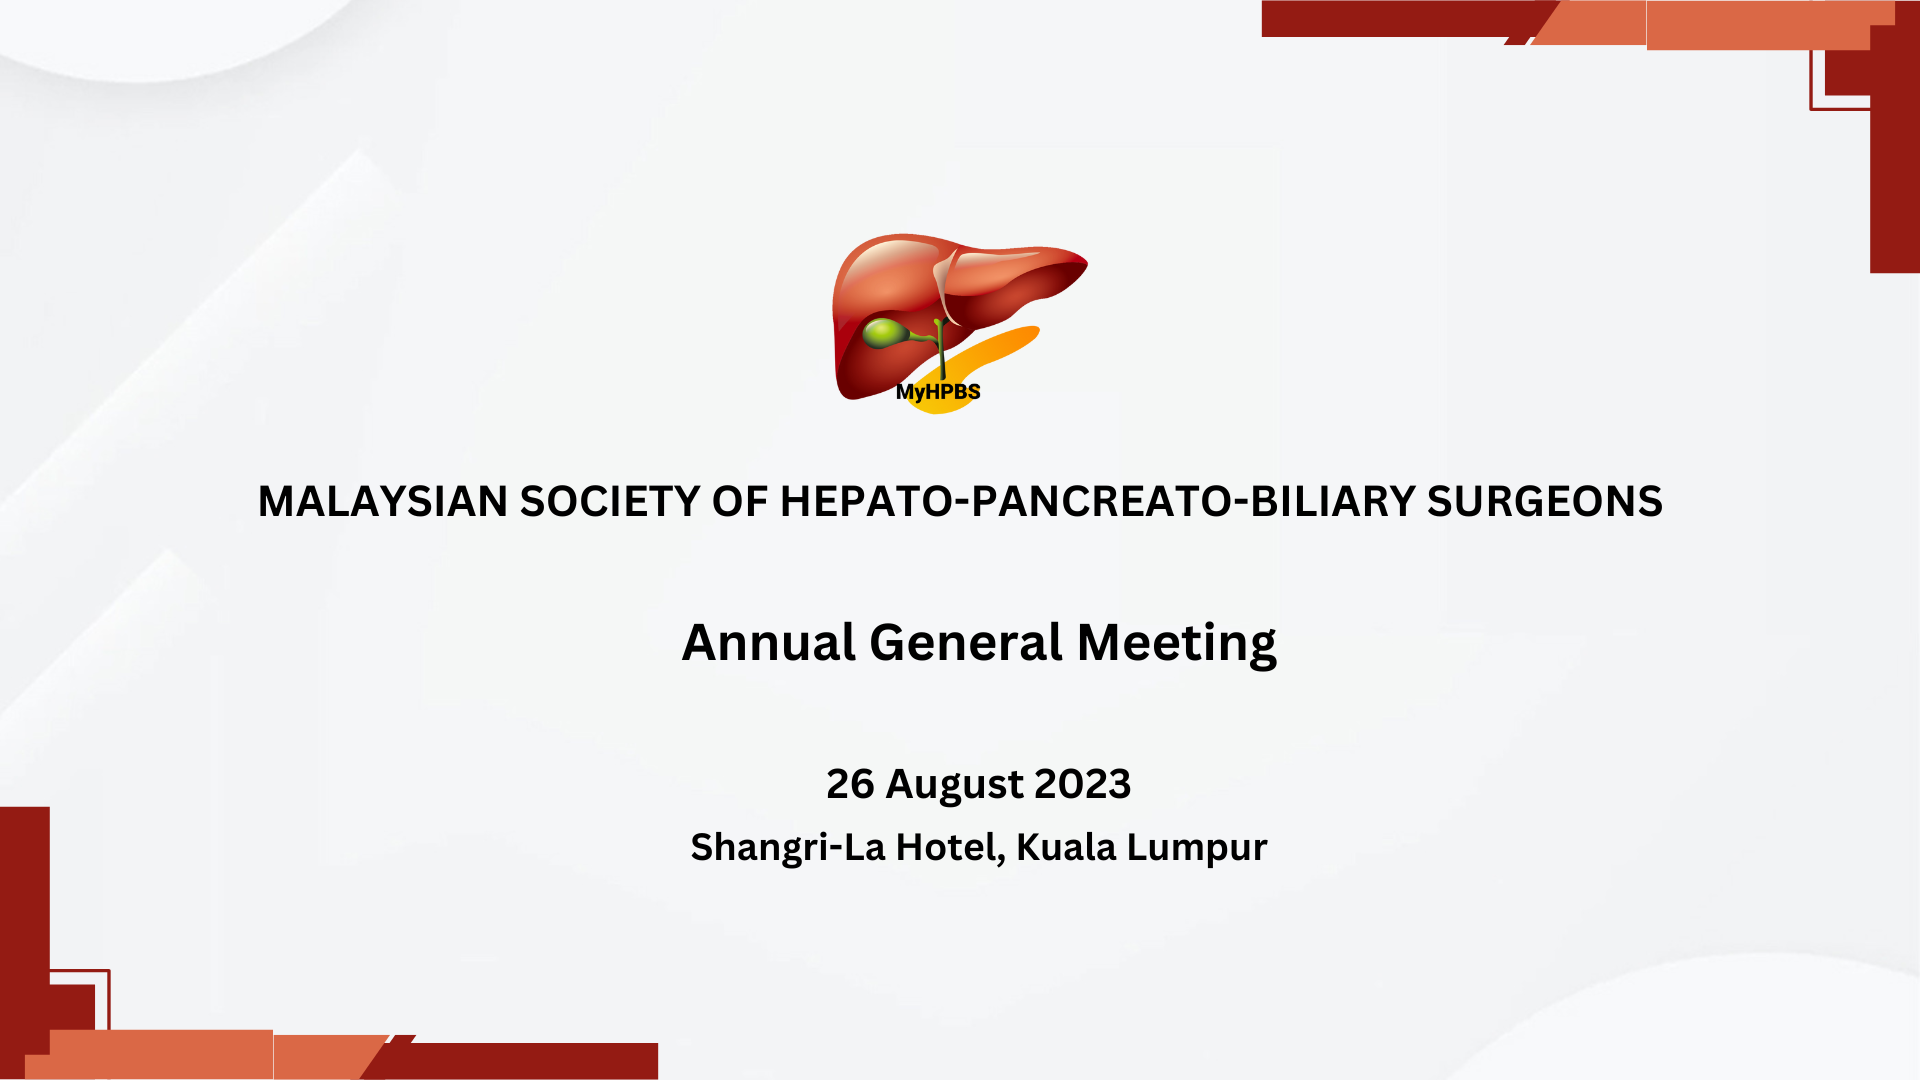 MyHPBS Annual General Meeting 